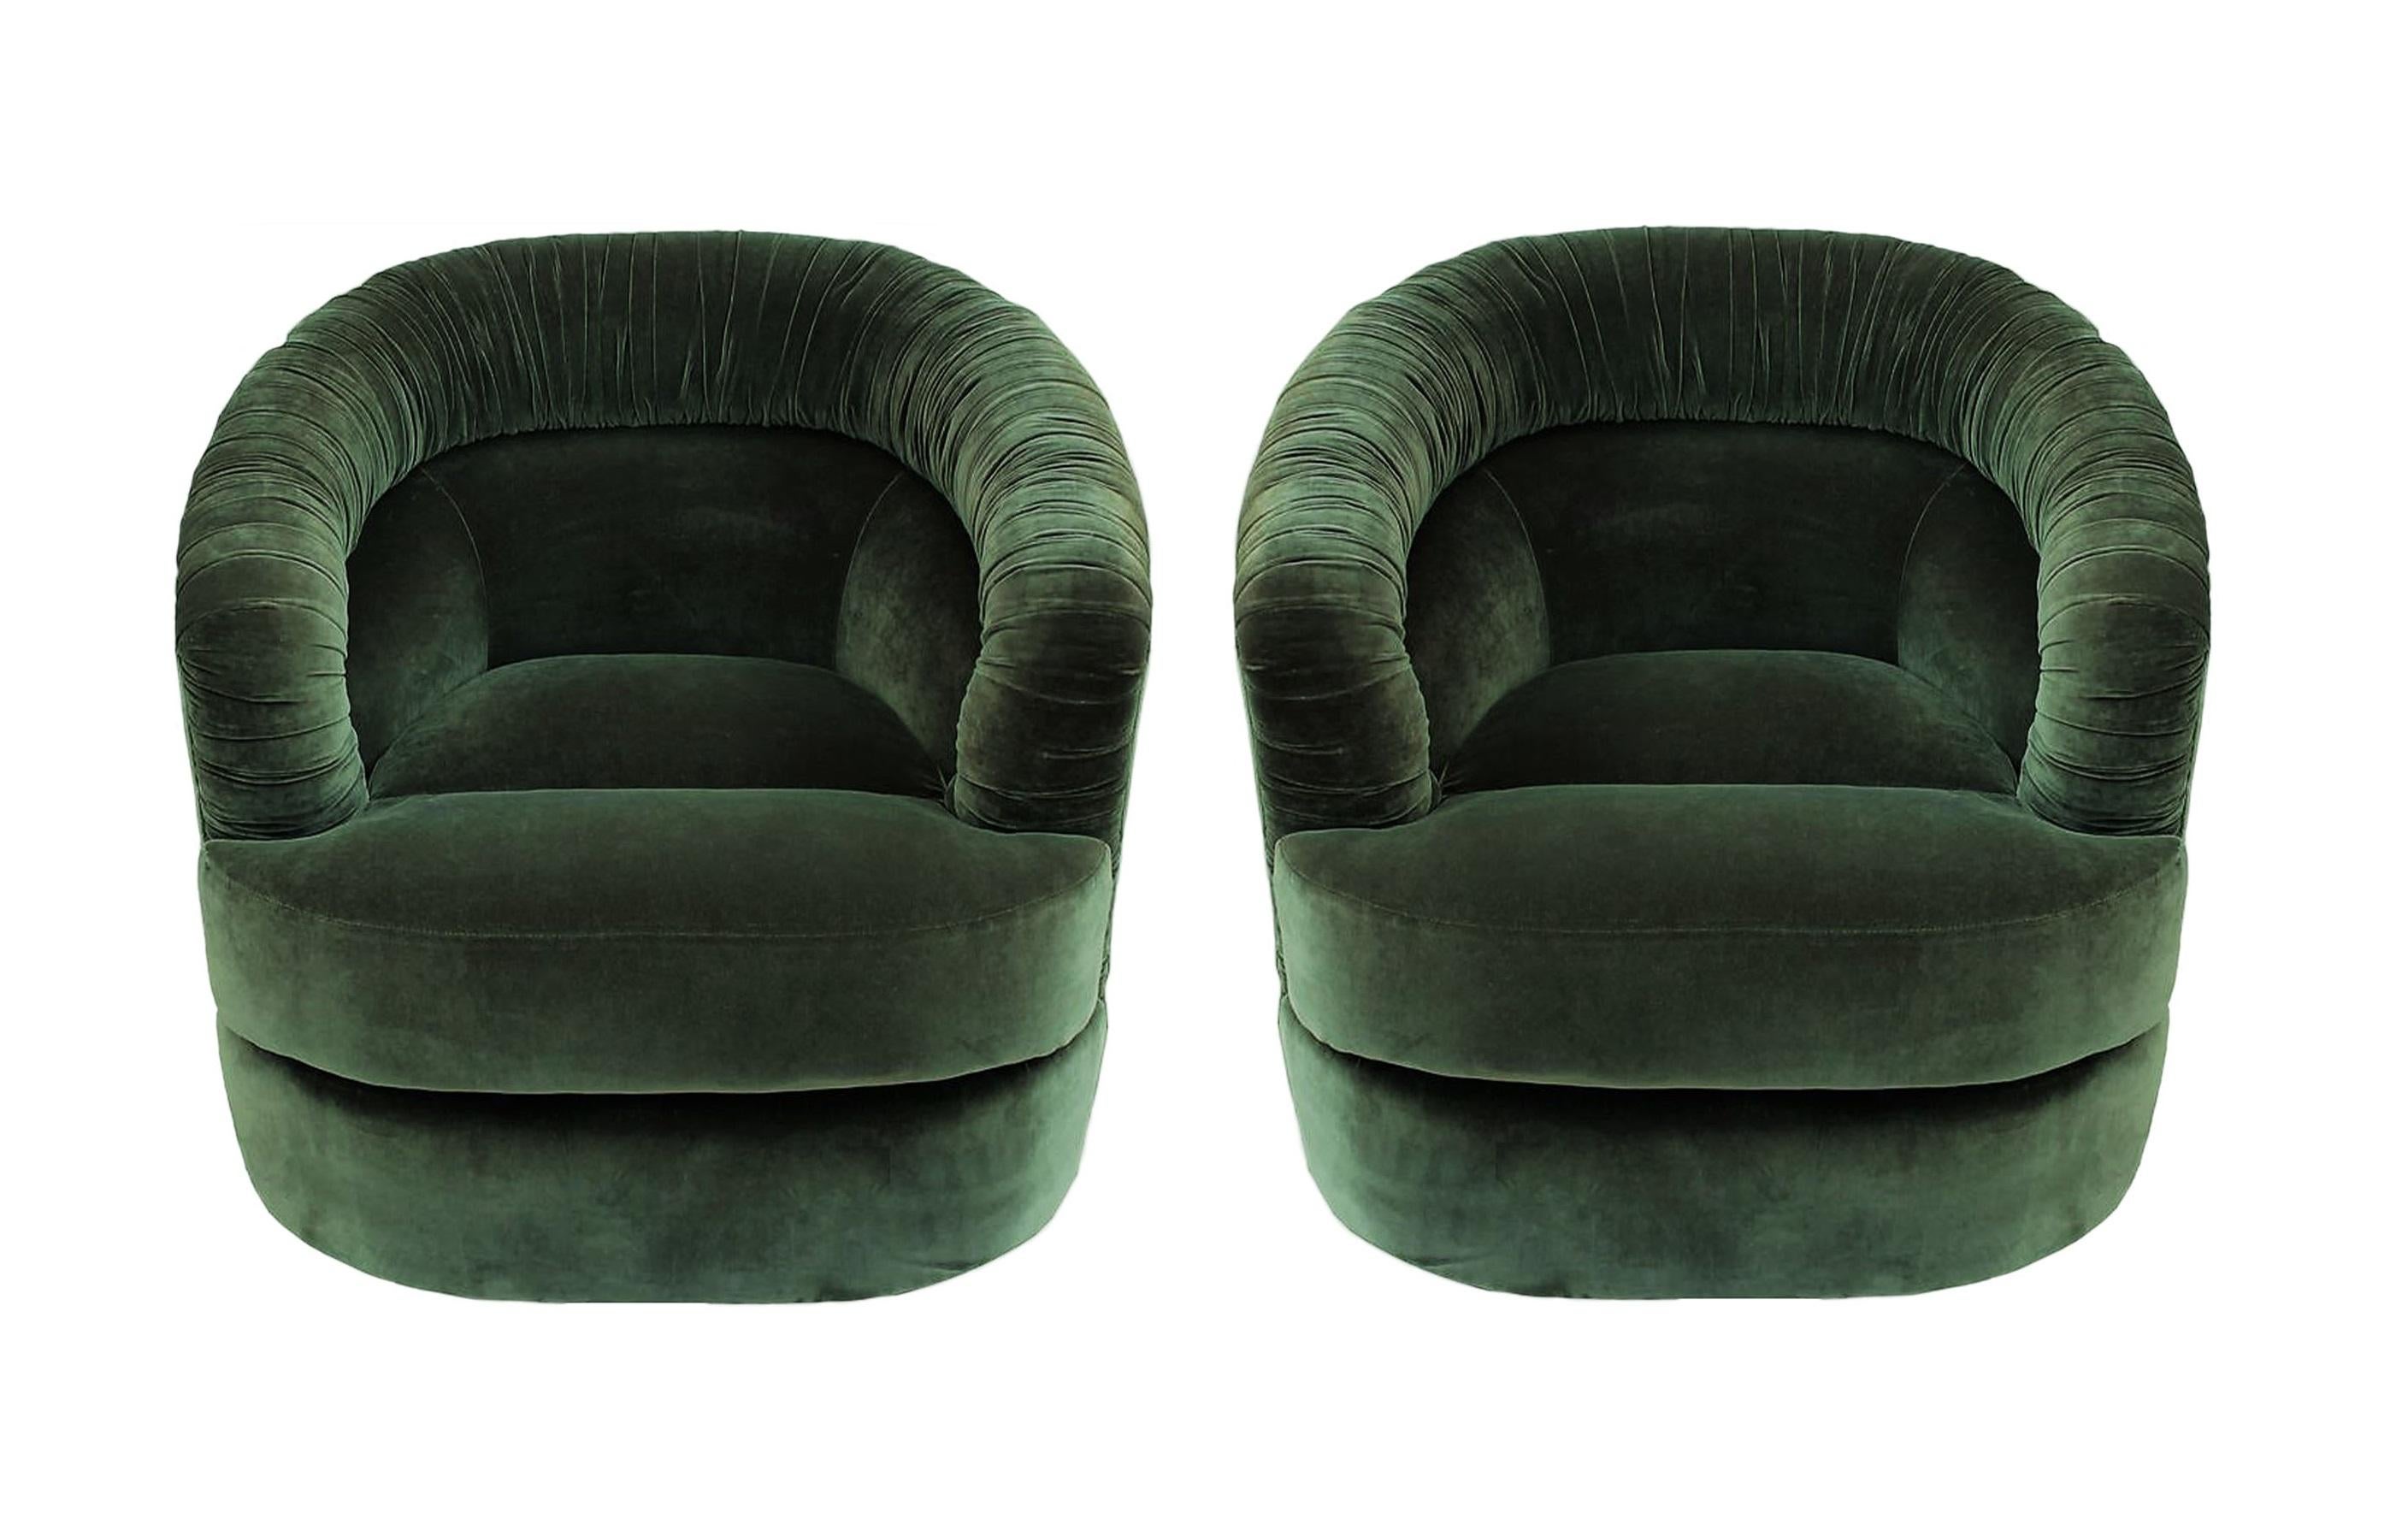 Mid-Century Modern pair of Milo Baughman style swivel club chairs. Each lounge chair features a unique tucked and ruched pleated barrel backs with the uppers raised on swiveling hidden base. Reupholstered in a subtle shade of green velvet fabric.